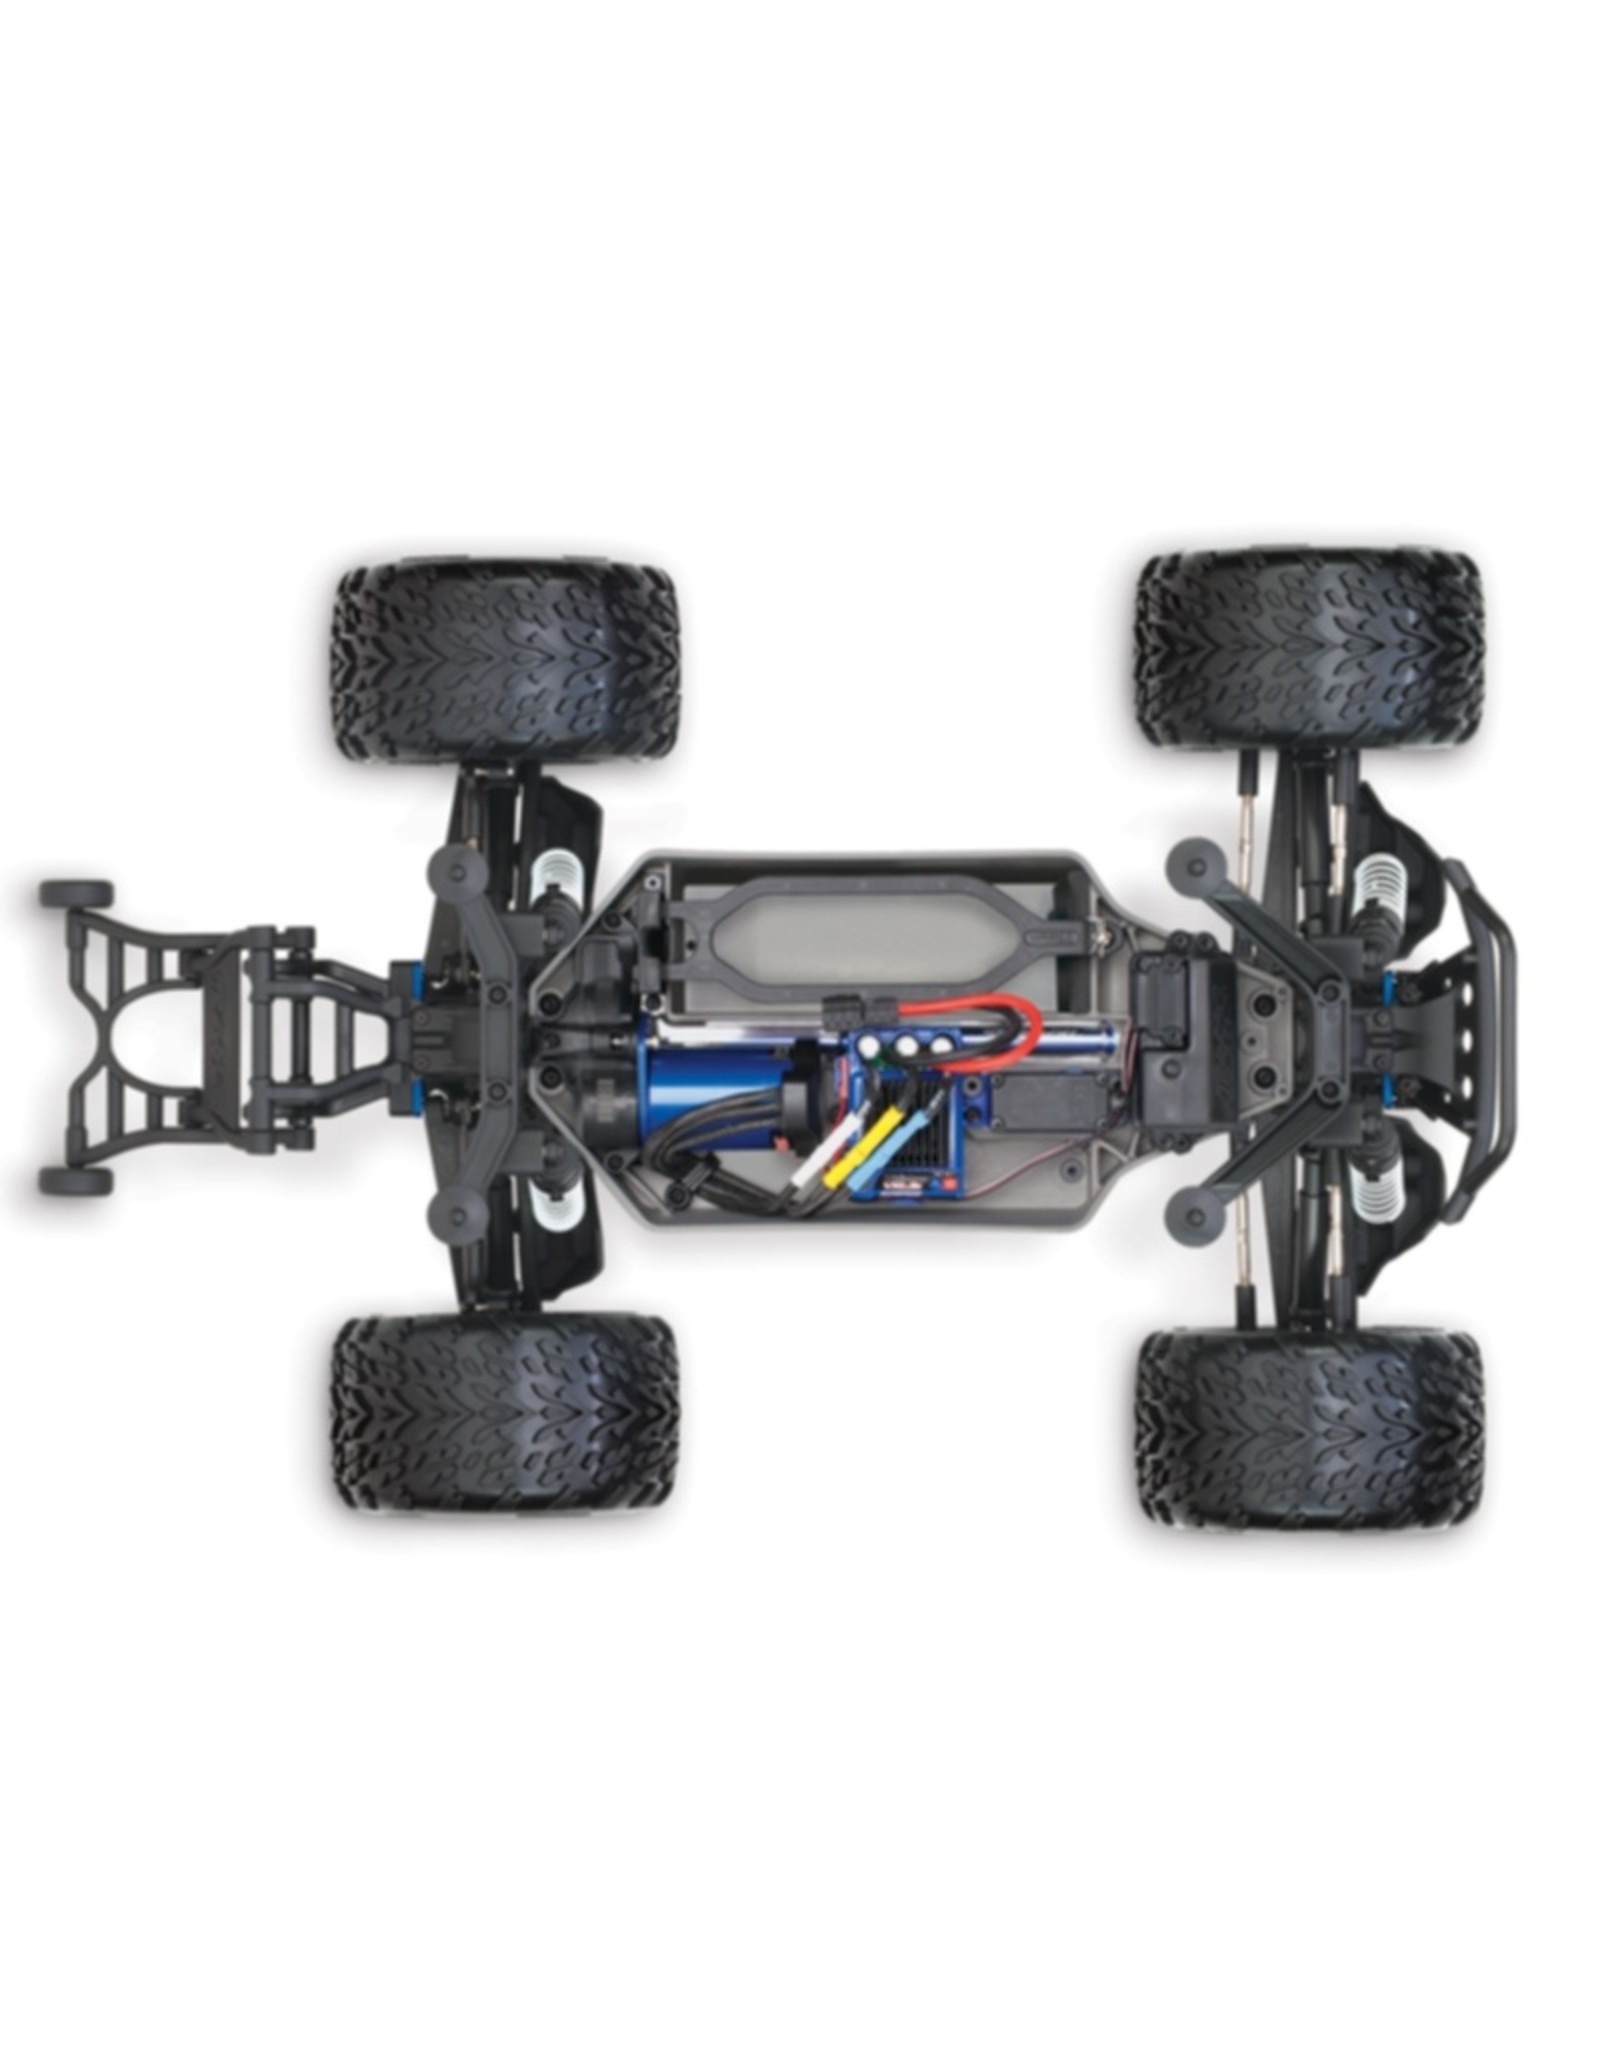 Traxxas TRA67086-4 Black Stampede® 4X4 VXL : 1/10 Scale Monster Truck. Ready-to-Race® with TQi Traxxas Link™ Velineon® VXL-3s brushless ESC (fwd/rev), and Traxxas Stability Management (TSM)